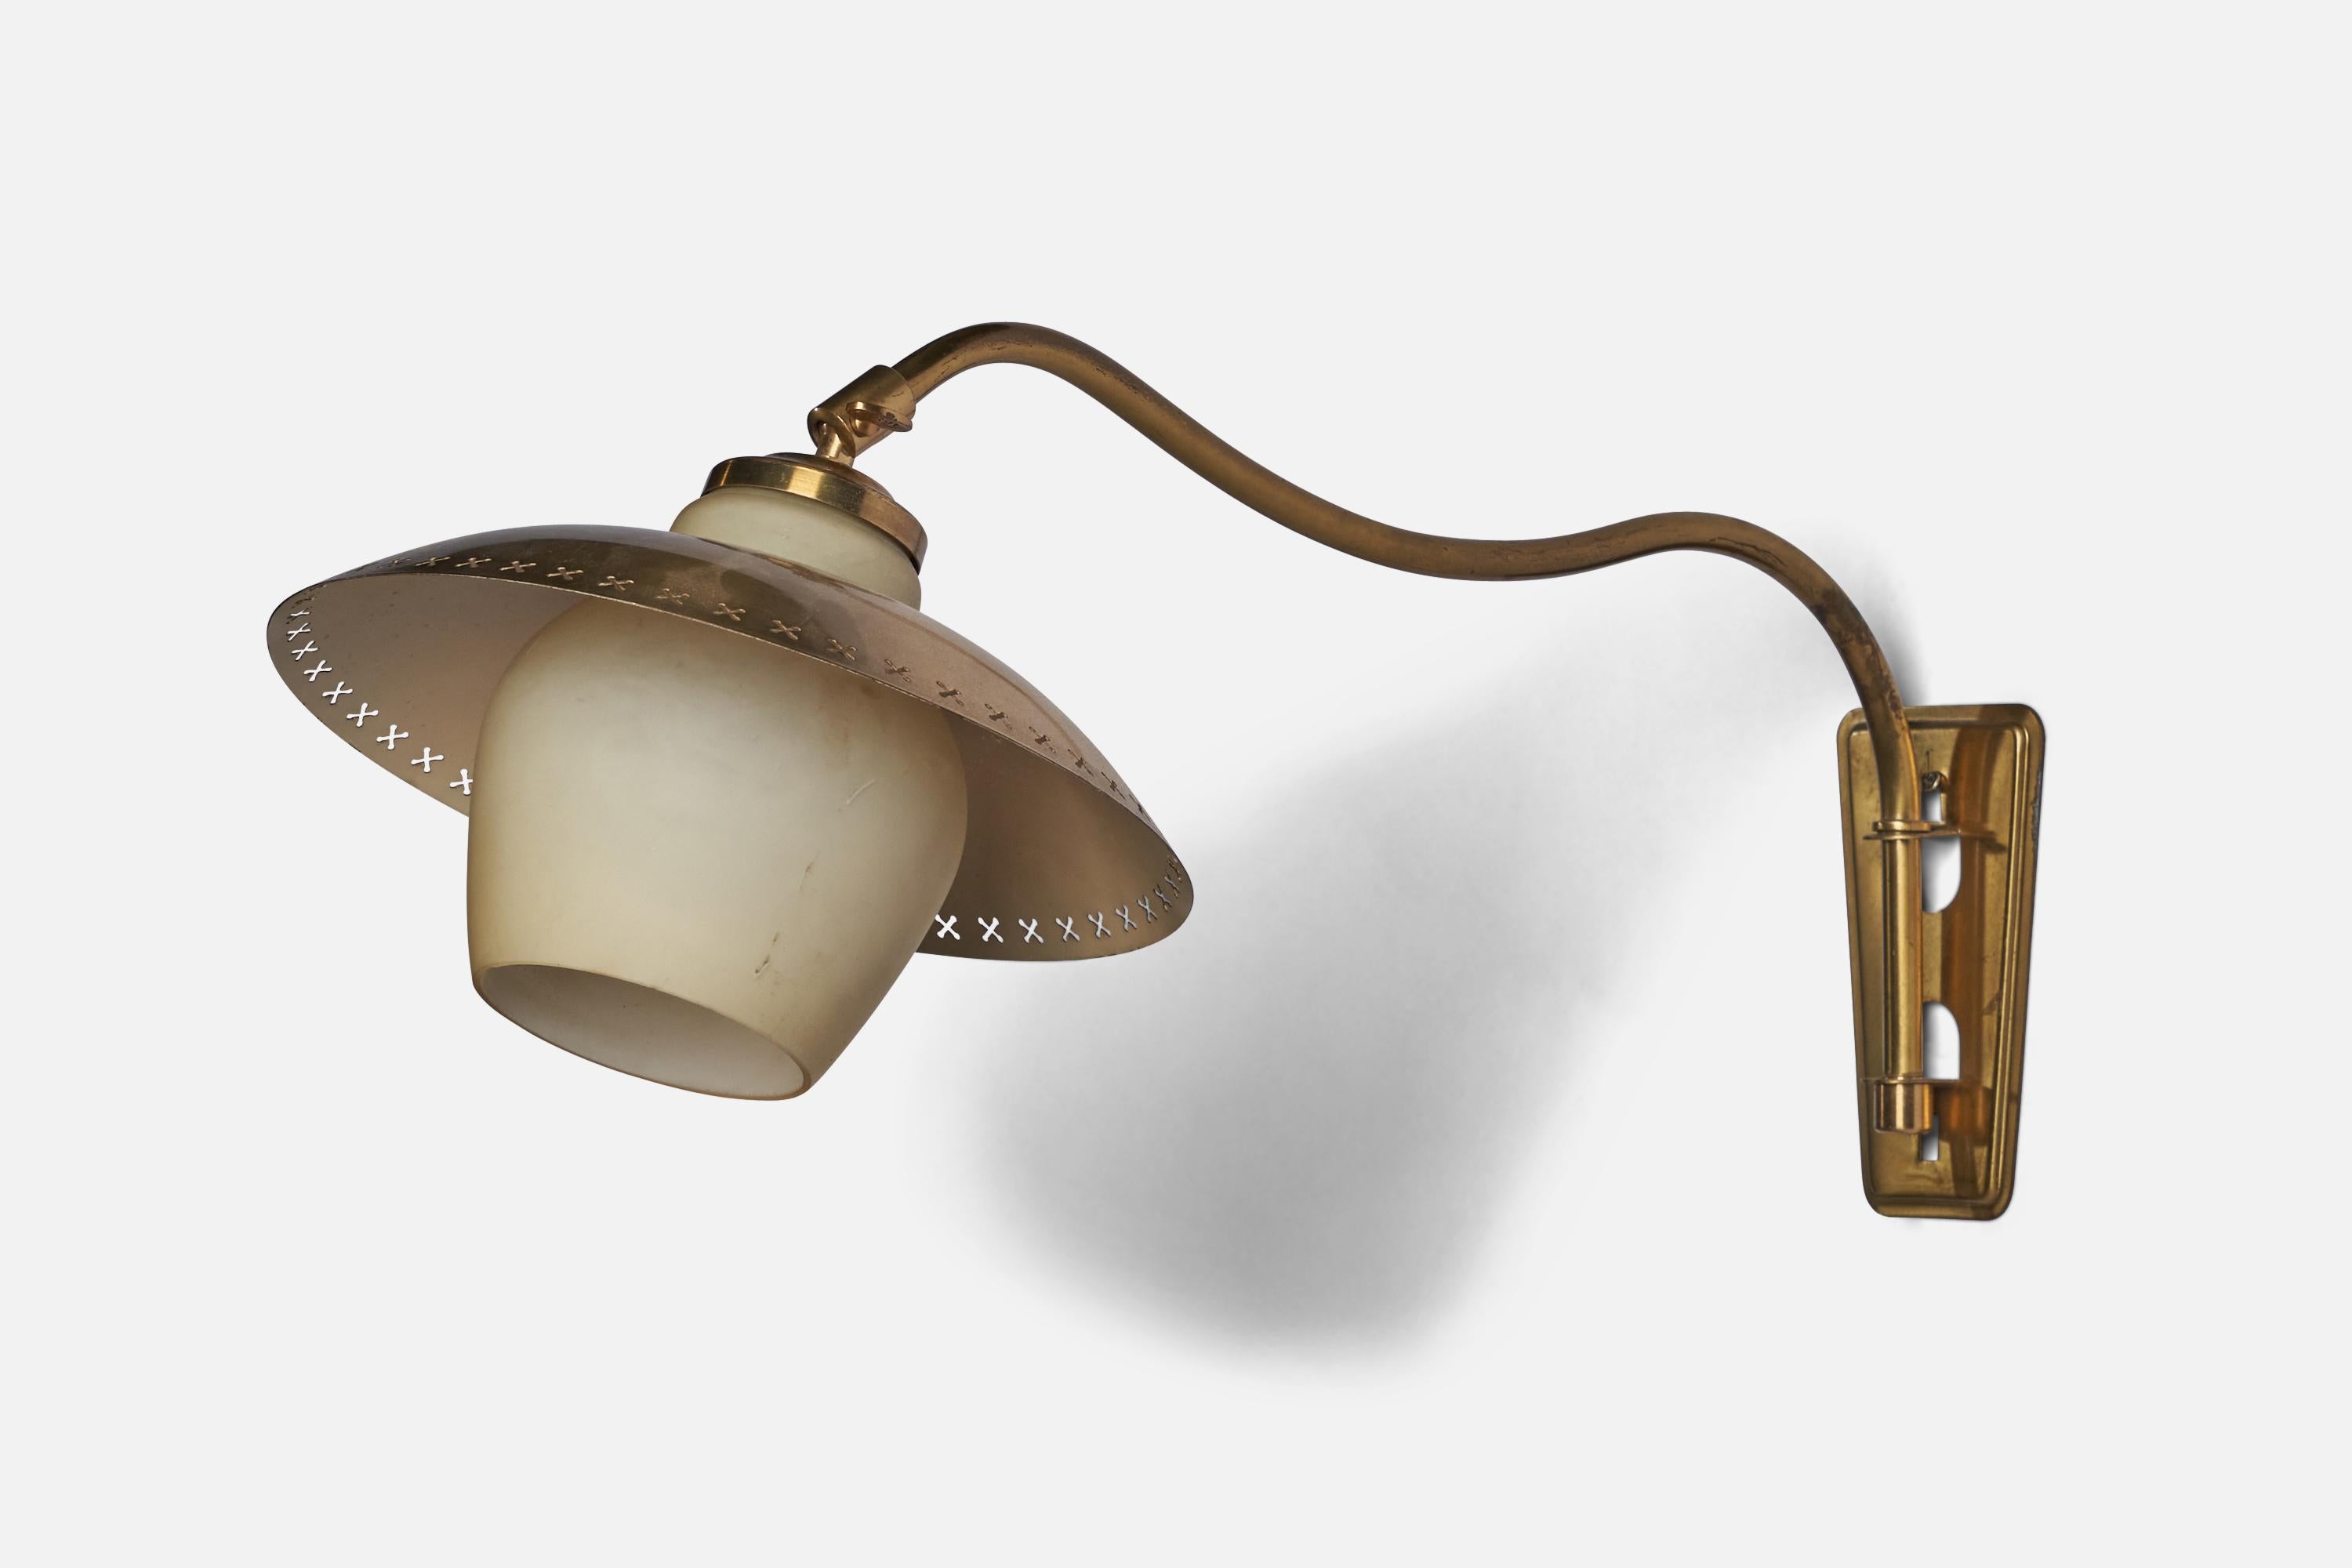 A brass and opaline glass wall light attributed to Bent Karlby for Lyfa, c. 1950s.

Overall Dimensions (inches): 9.25” H x 9” W x 19” D
Back Plate Dimensions (inches): 5.5” H x 3” W
Bulb Specifications: E-26 Bulb
Number of Sockets: 1
All lighting